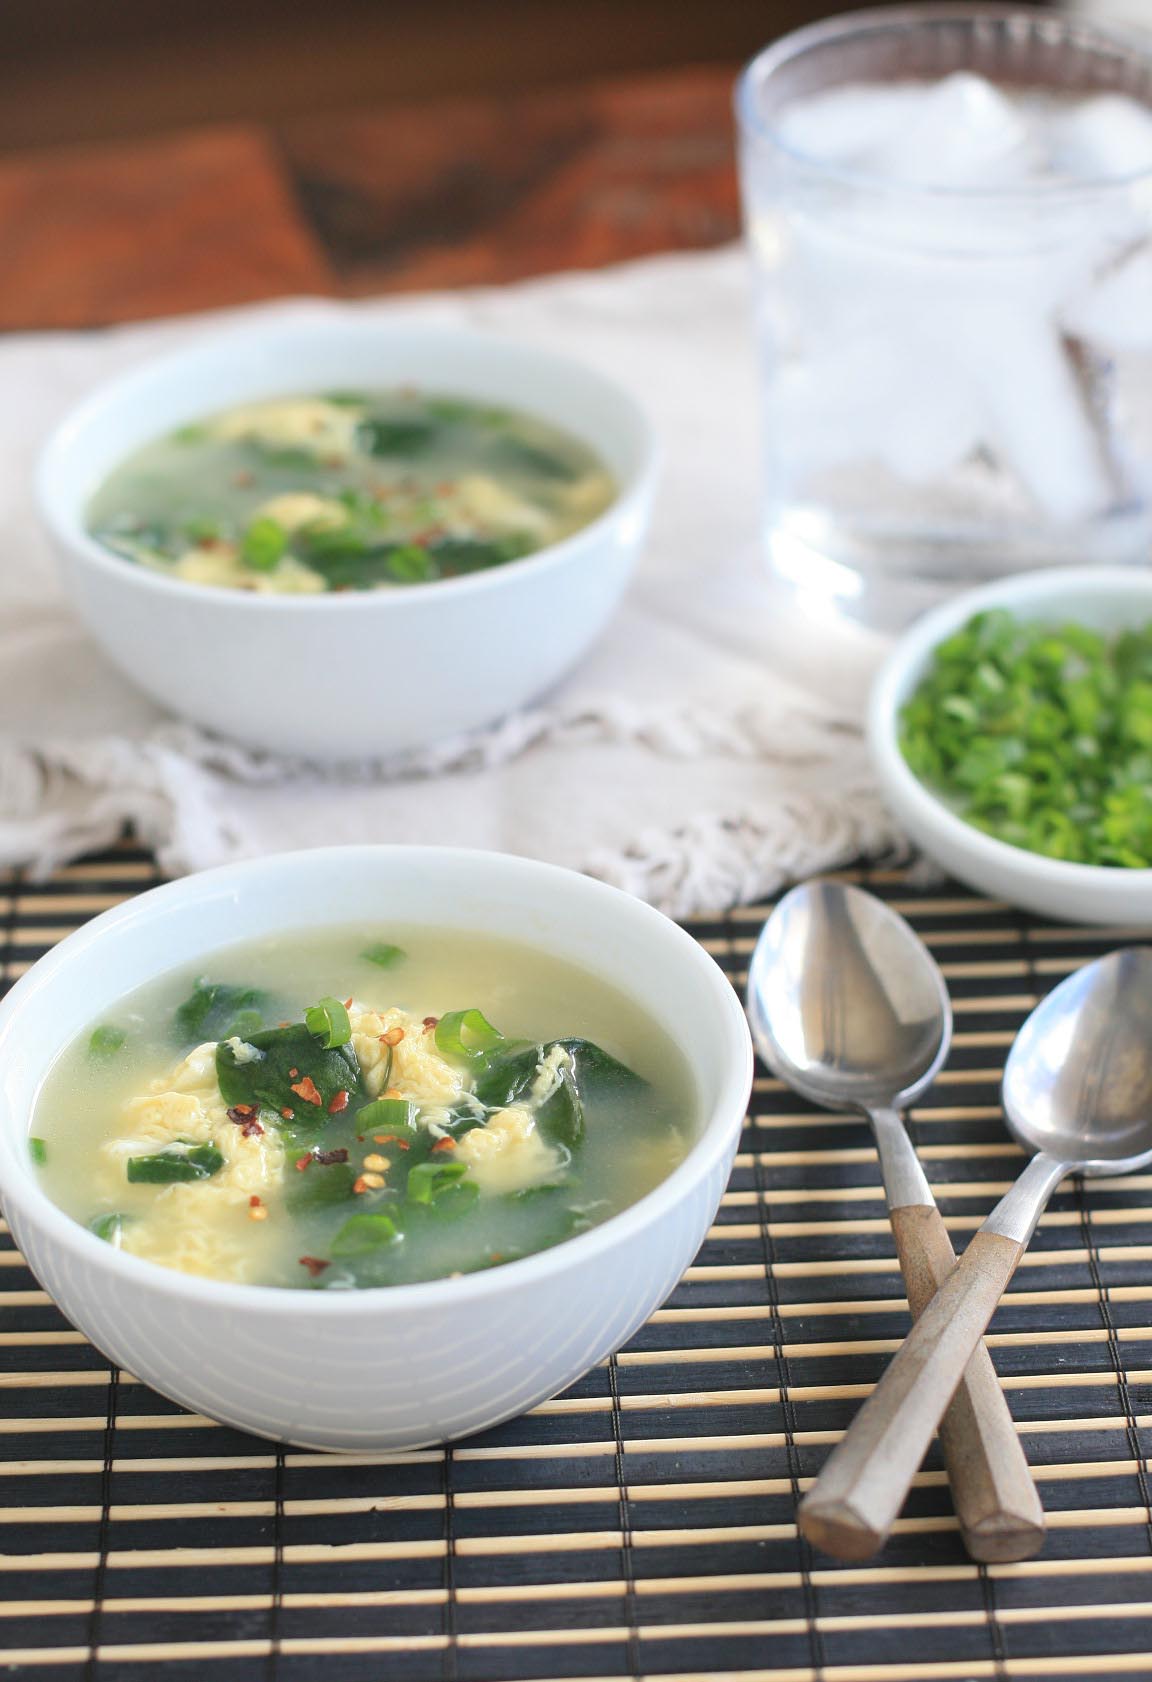 13. Spinach and Egg Drop Soup